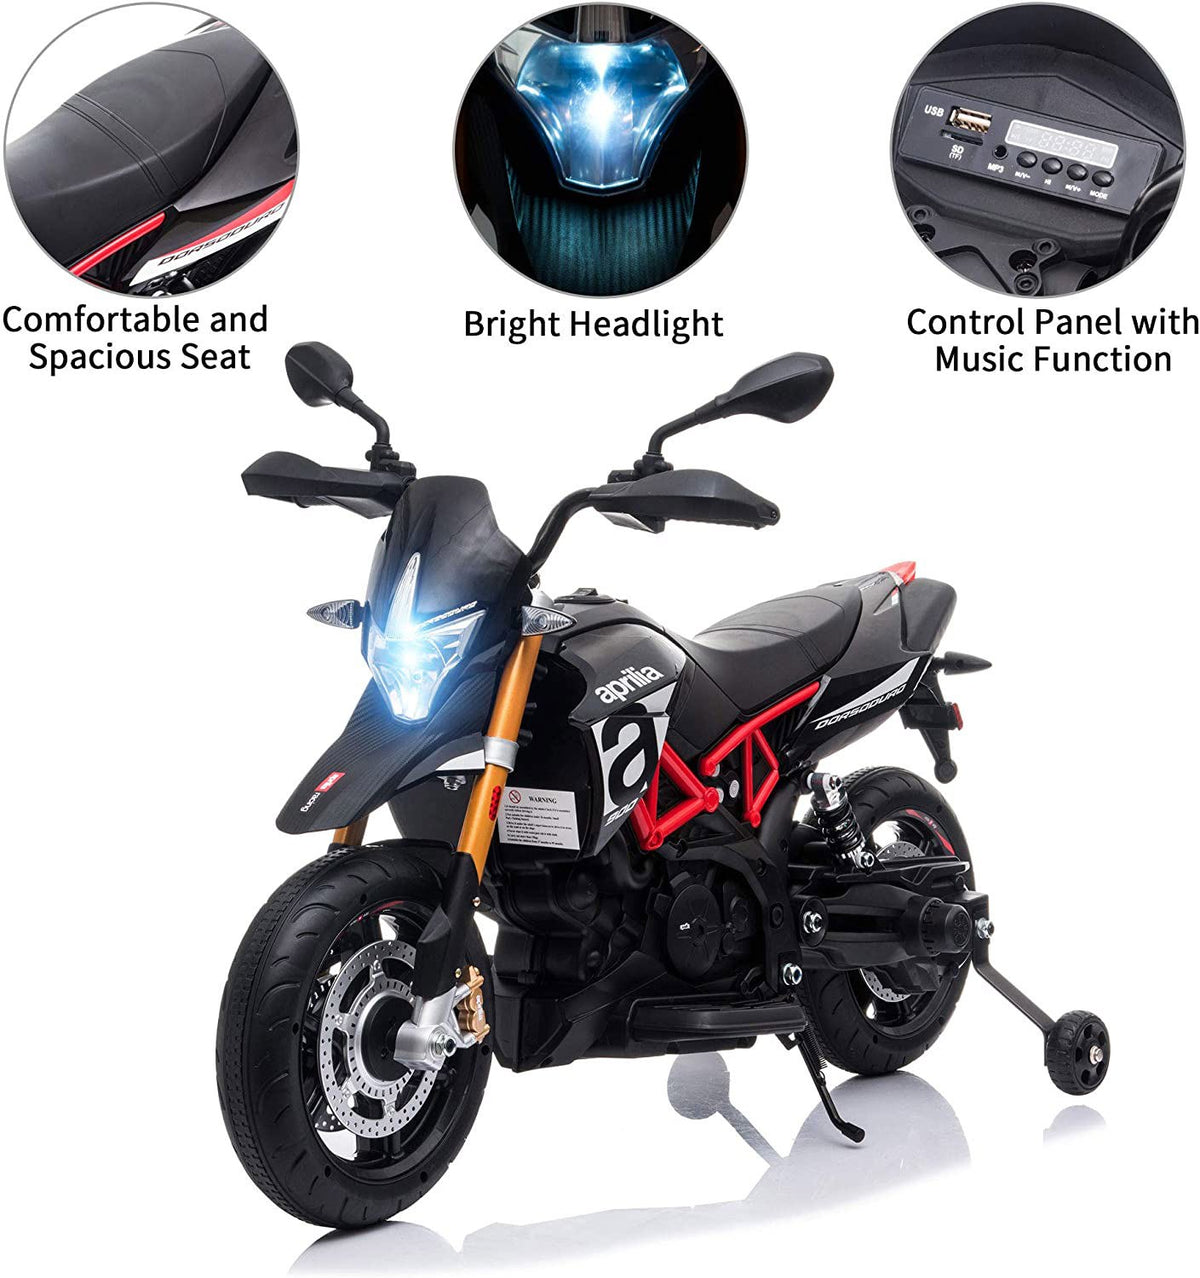 12V Kids Ride-On Motorcycle, Battery Powered Dirt Bikes for Kids with Lights, Music Story USB MP3